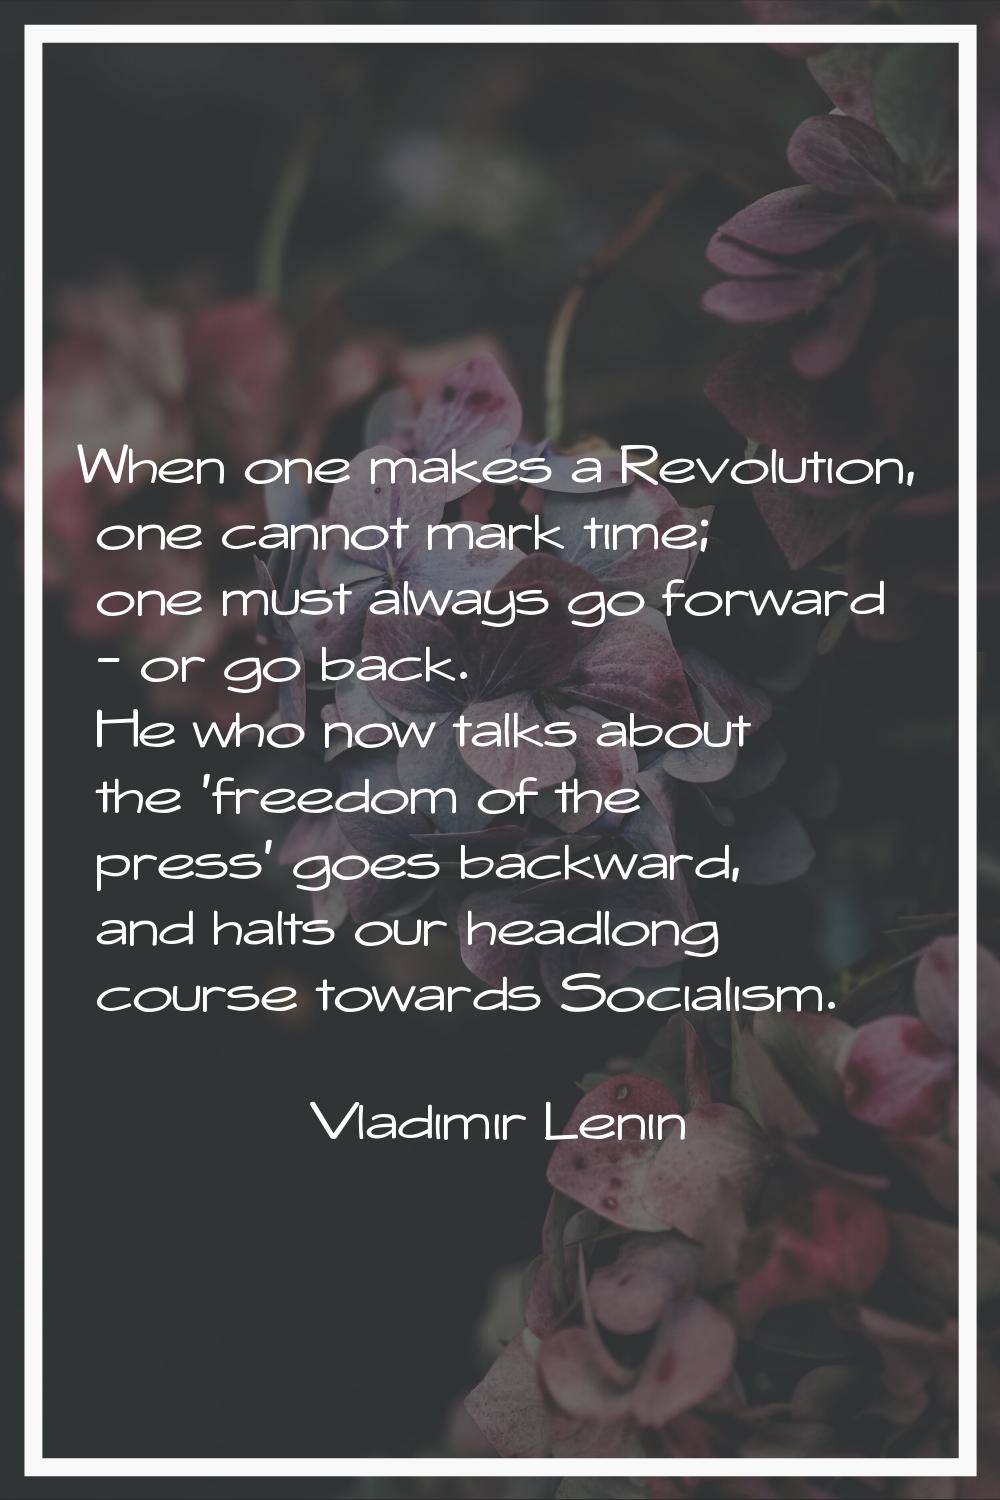 When one makes a Revolution, one cannot mark time; one must always go forward - or go back. He who 